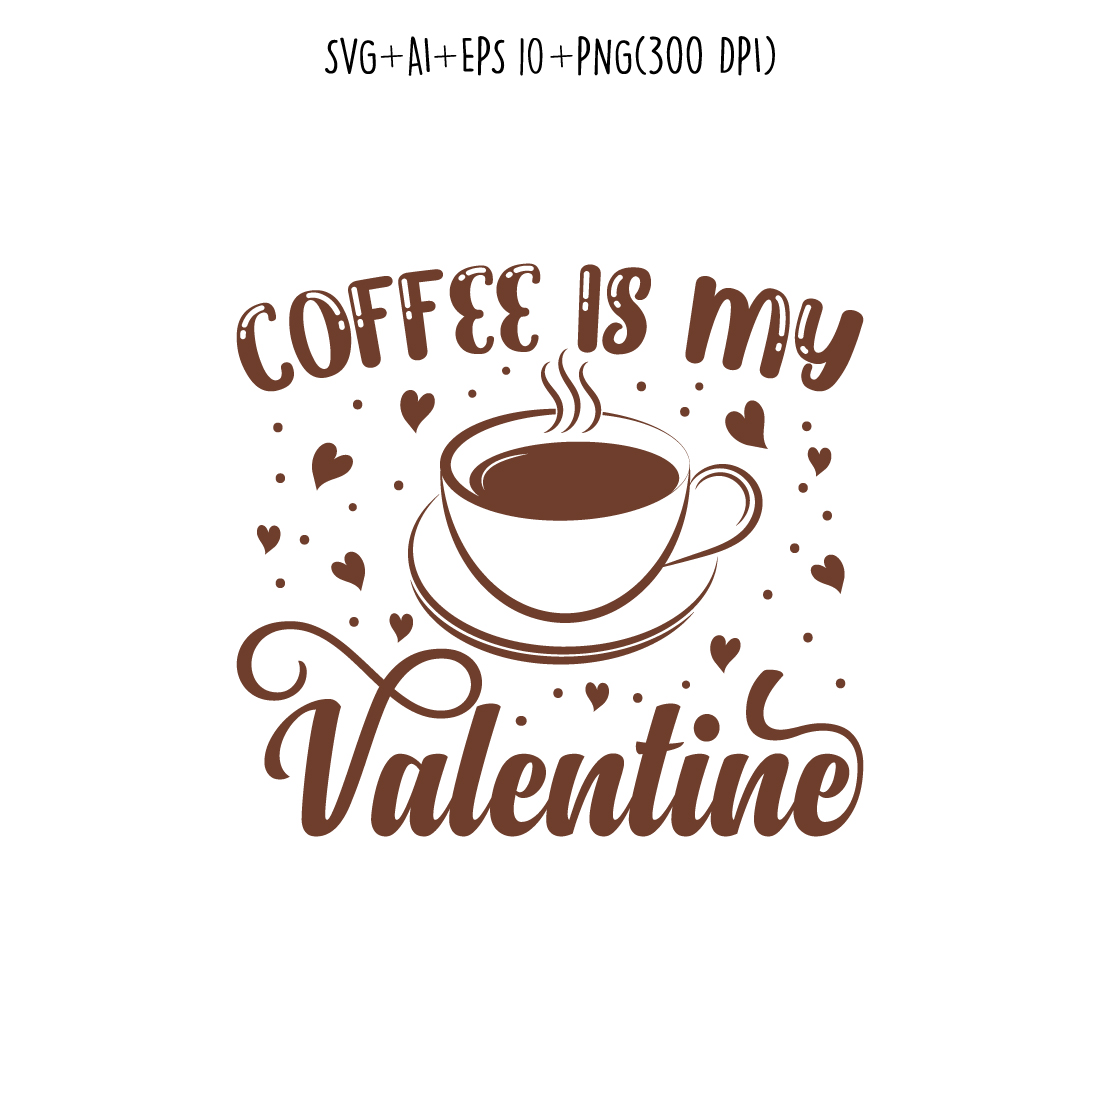 coffee is my valentine coffee typography design for t-shirts, print, templates, logos, mug cover image.